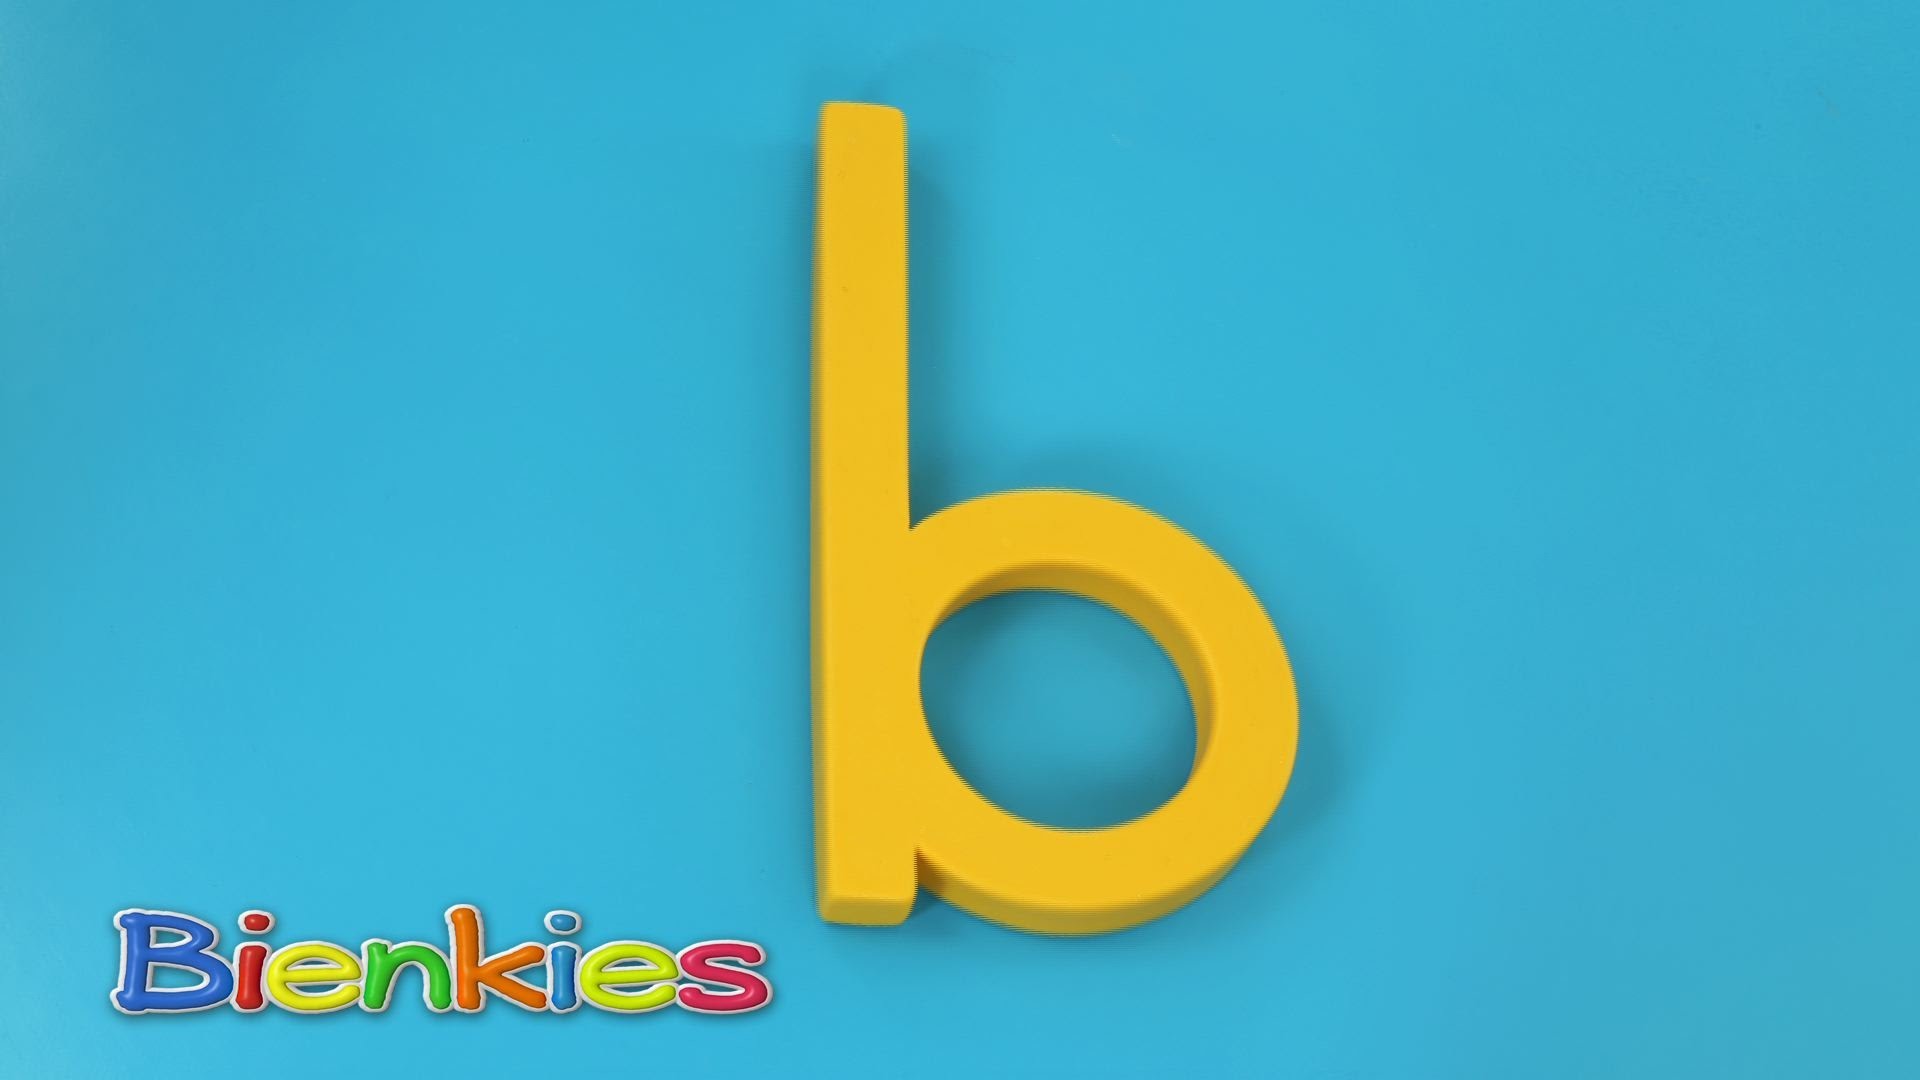 1920x1080 Letter b - Clay Animation